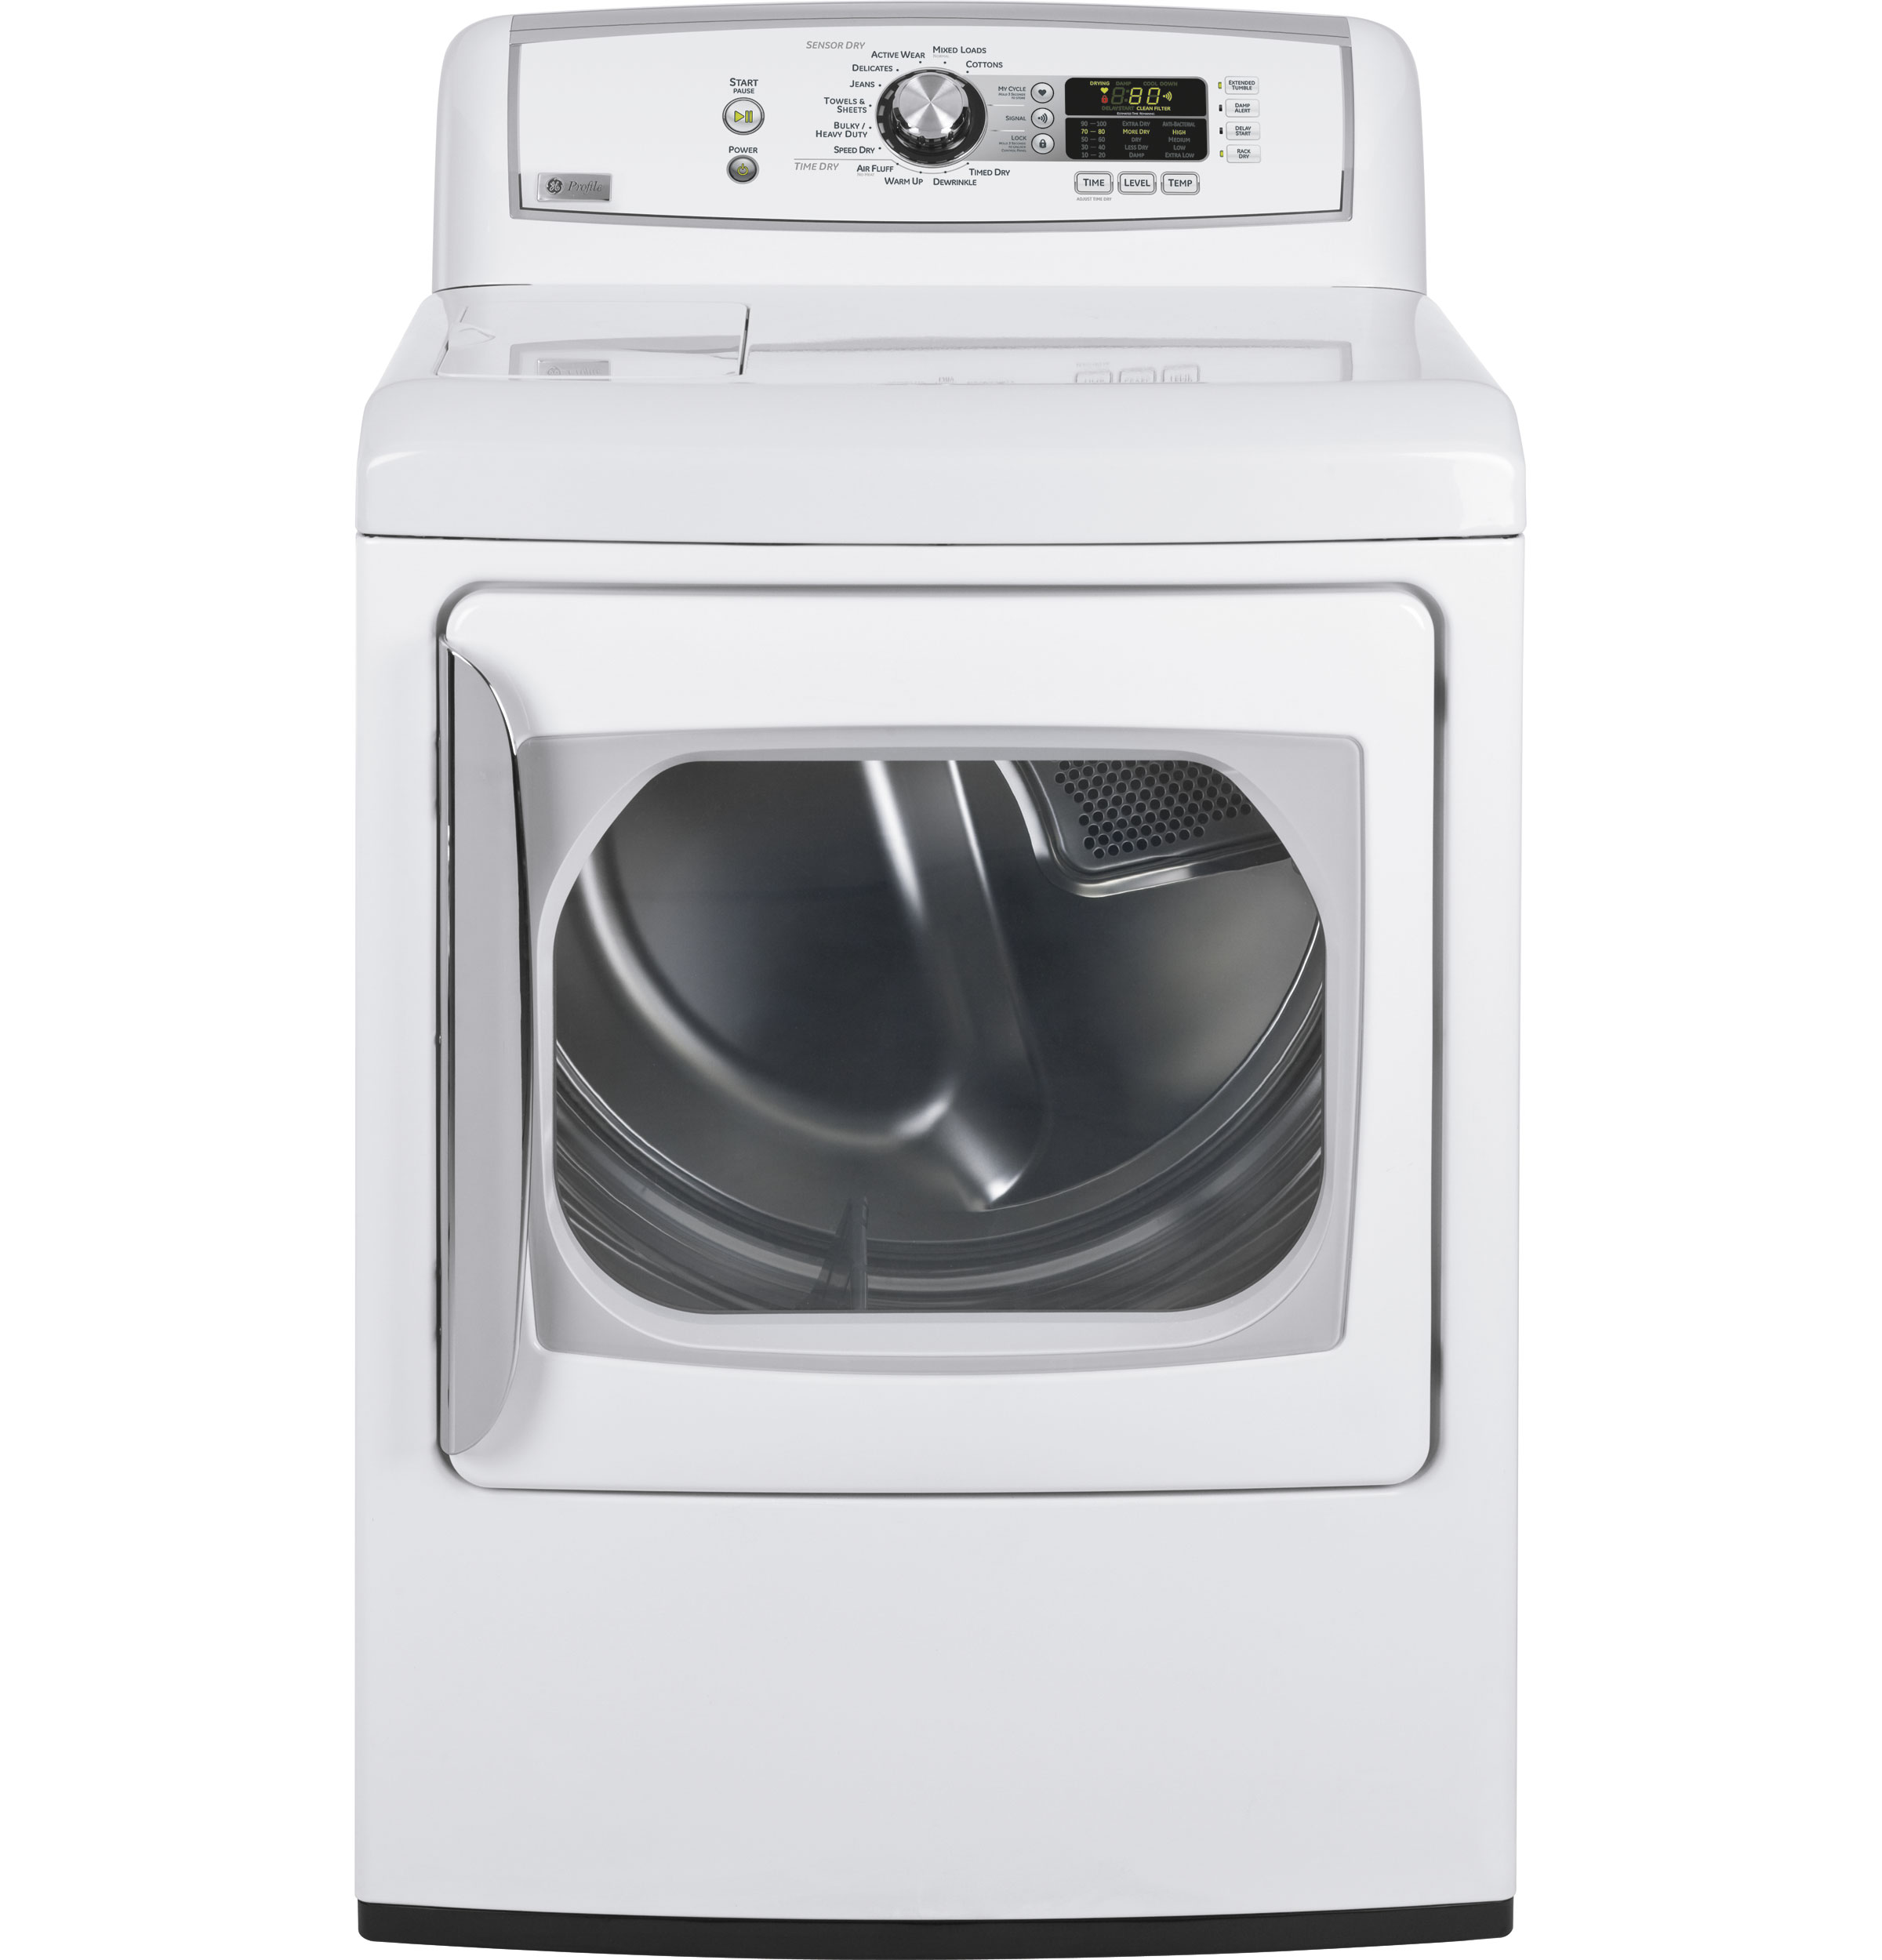 GE Profile Harmony™ 7.3 Cu. Ft. Stainless Steel Capacity Electric Dryer